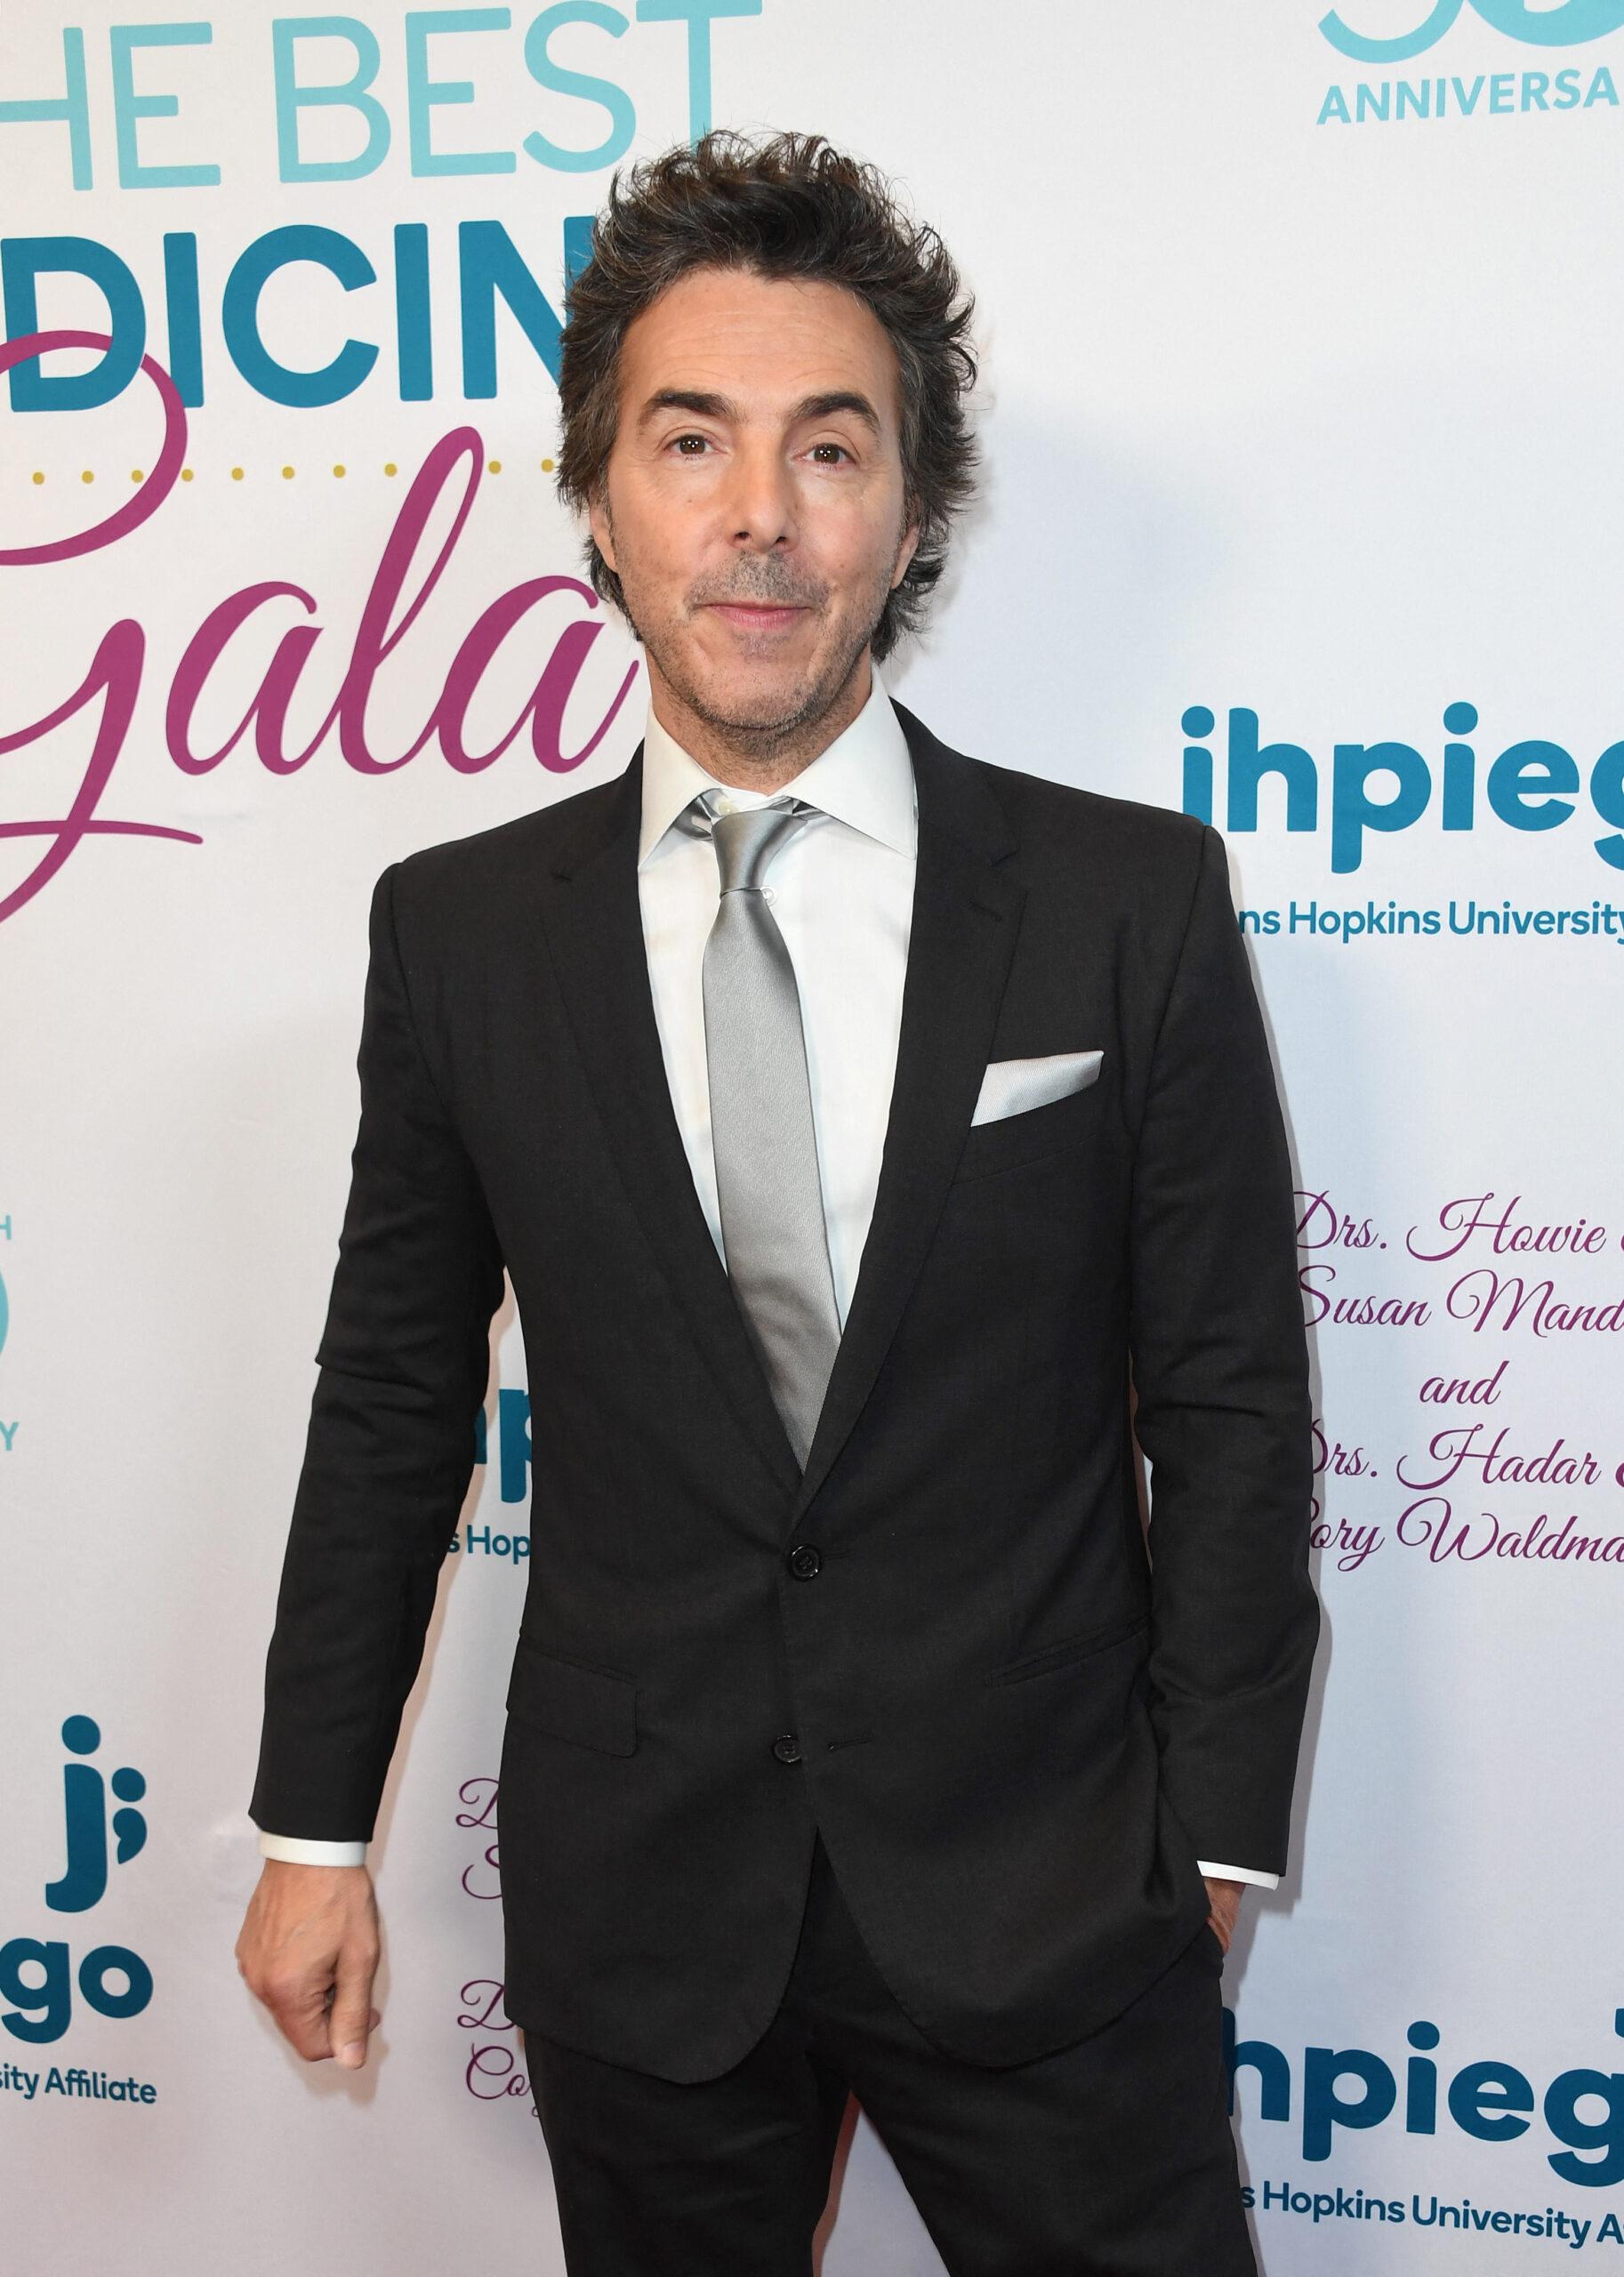 Shawn Levy at the 2022 Jhpiego Awards Ceremony